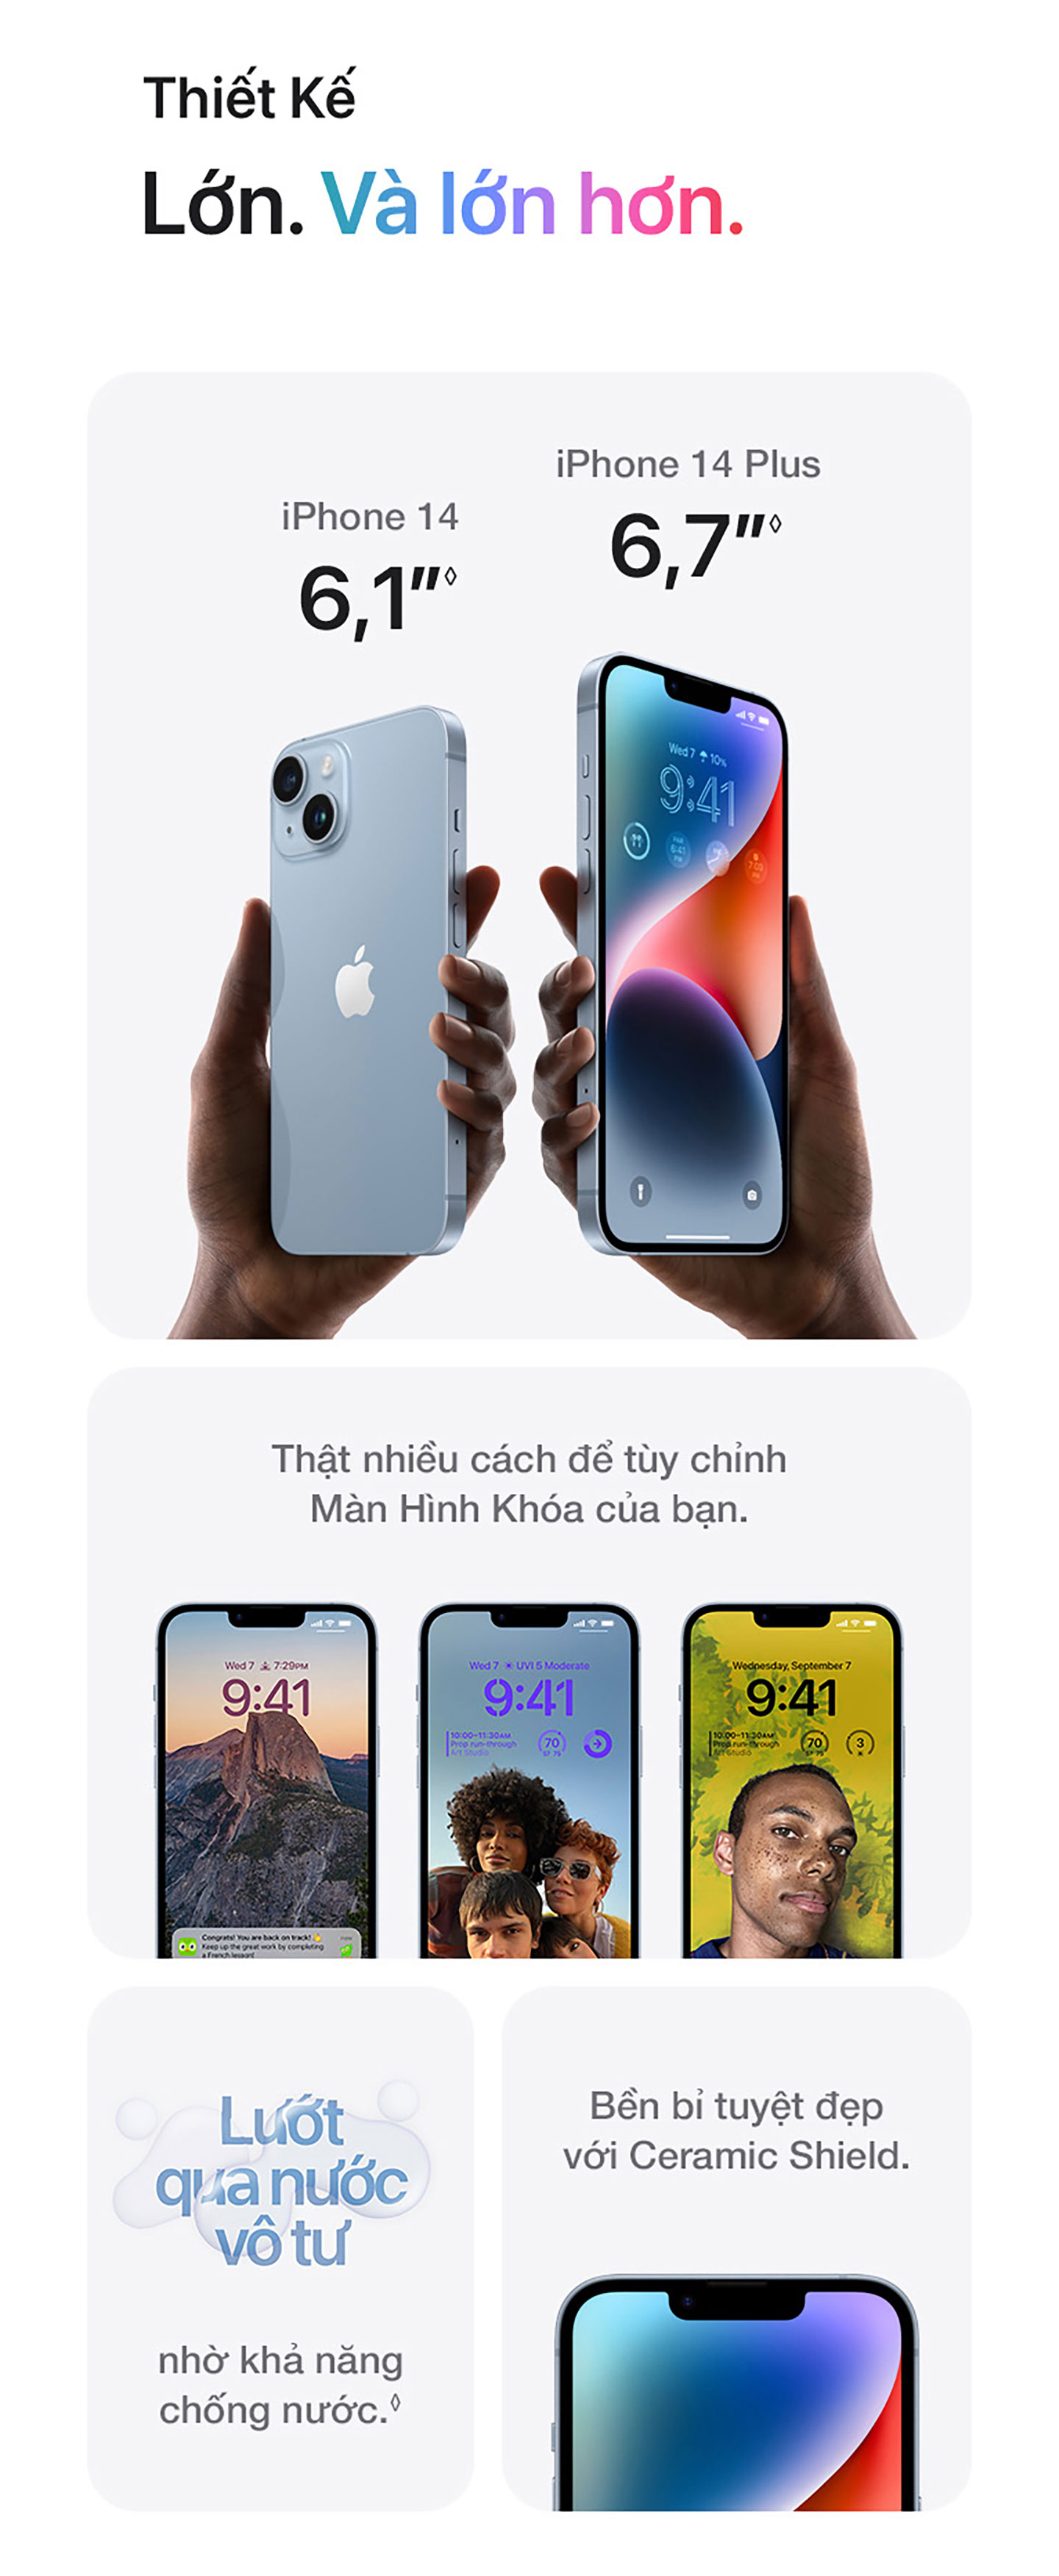 iPhone 14 Thiết kế